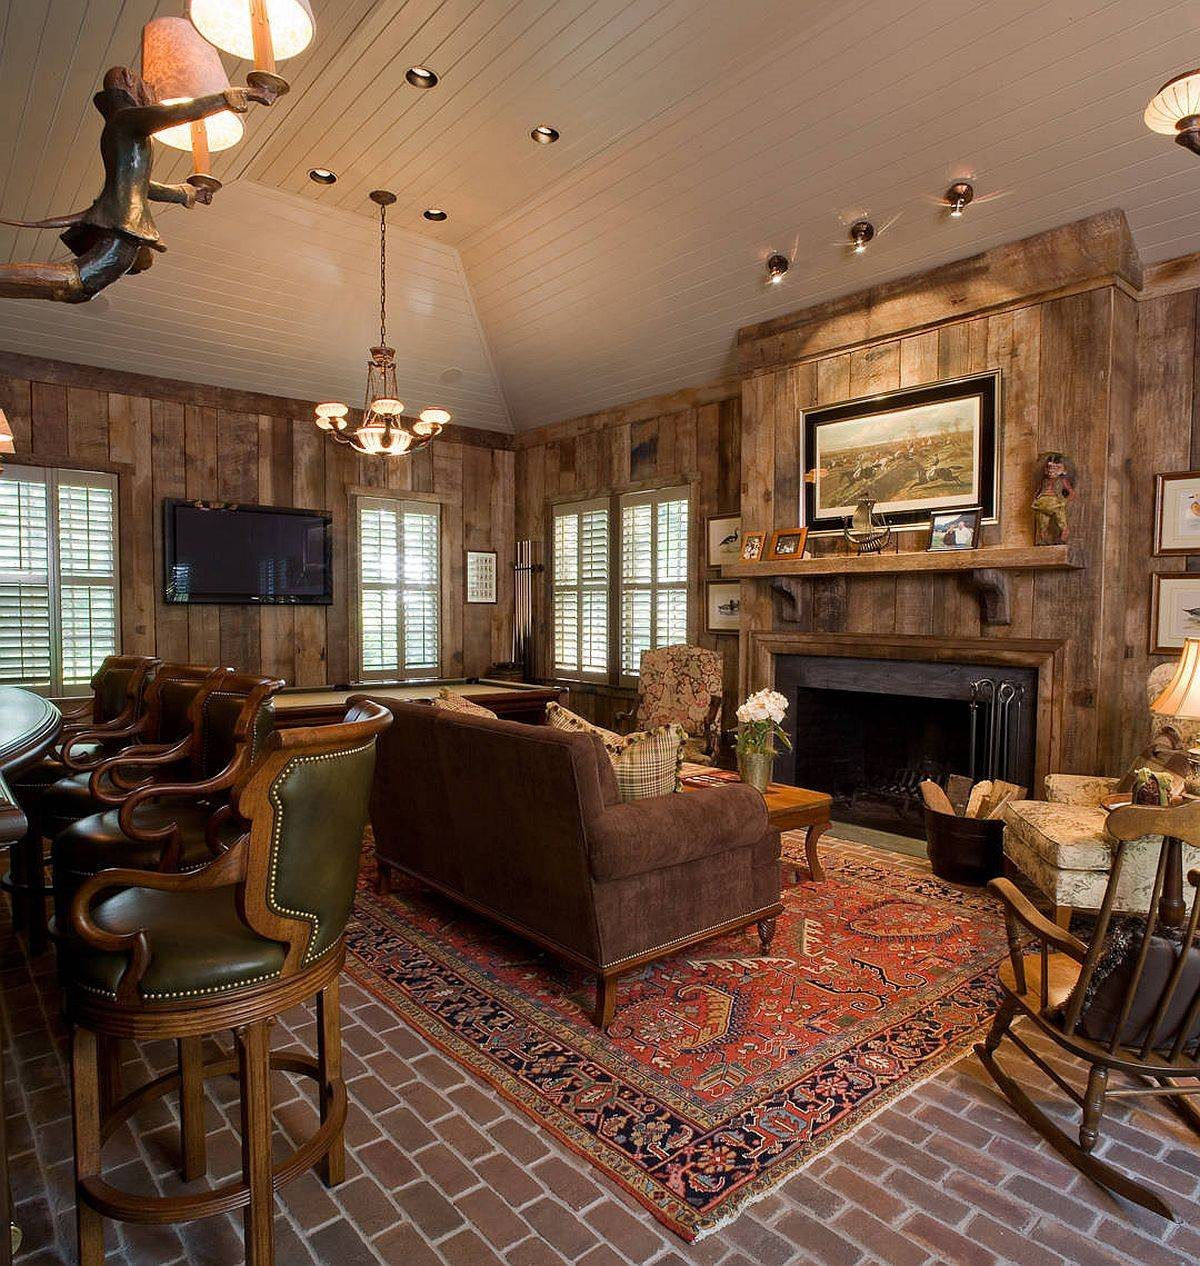 small-and-cozy-rustic-living-room-with-wooden-walls-is-inspired-by-the-log-cabin-look-77323.jpg